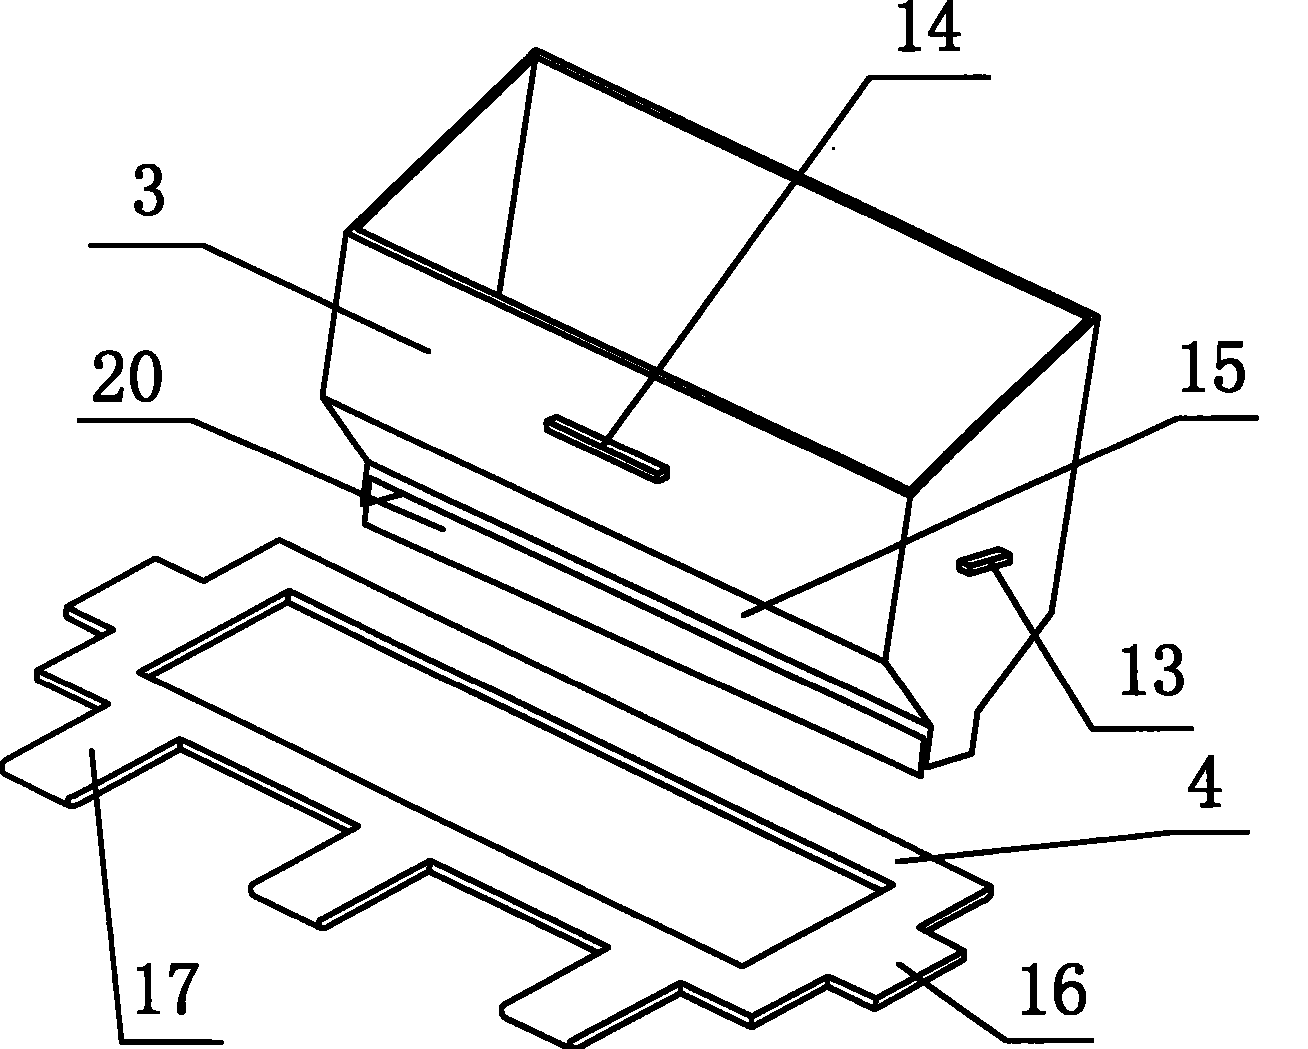 Powder sending and laying device for quickly shaping device